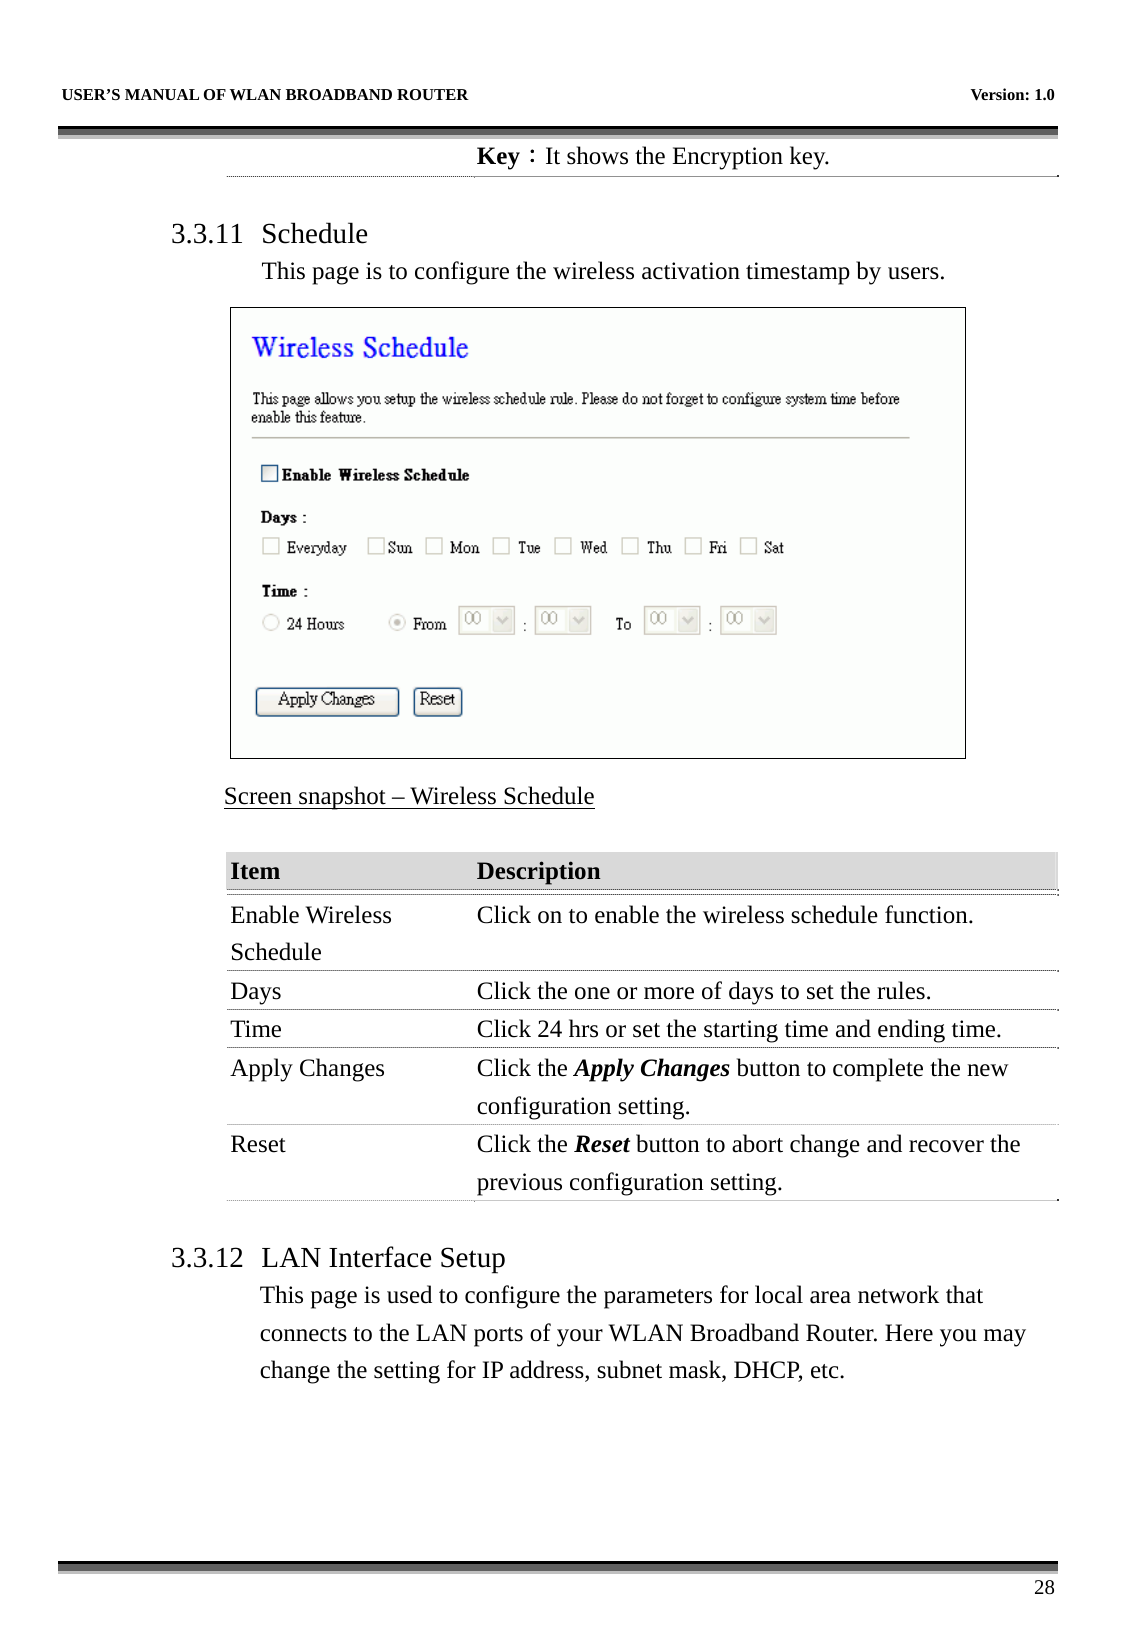   USER’S MANUAL OF WLAN BROADBAND ROUTER    Version: 1.0      28 Key：It shows the Encryption key.  3.3.11 Schedule This page is to configure the wireless activation timestamp by users.  Screen snapshot – Wireless Schedule  Item  Description   Enable Wireless Schedule Click on to enable the wireless schedule function. Days  Click the one or more of days to set the rules. Time  Click 24 hrs or set the starting time and ending time. Apply Changes  Click the Apply Changes button to complete the new configuration setting. Reset Click the Reset button to abort change and recover the previous configuration setting.  3.3.12 LAN Interface Setup This page is used to configure the parameters for local area network that connects to the LAN ports of your WLAN Broadband Router. Here you may change the setting for IP address, subnet mask, DHCP, etc. 